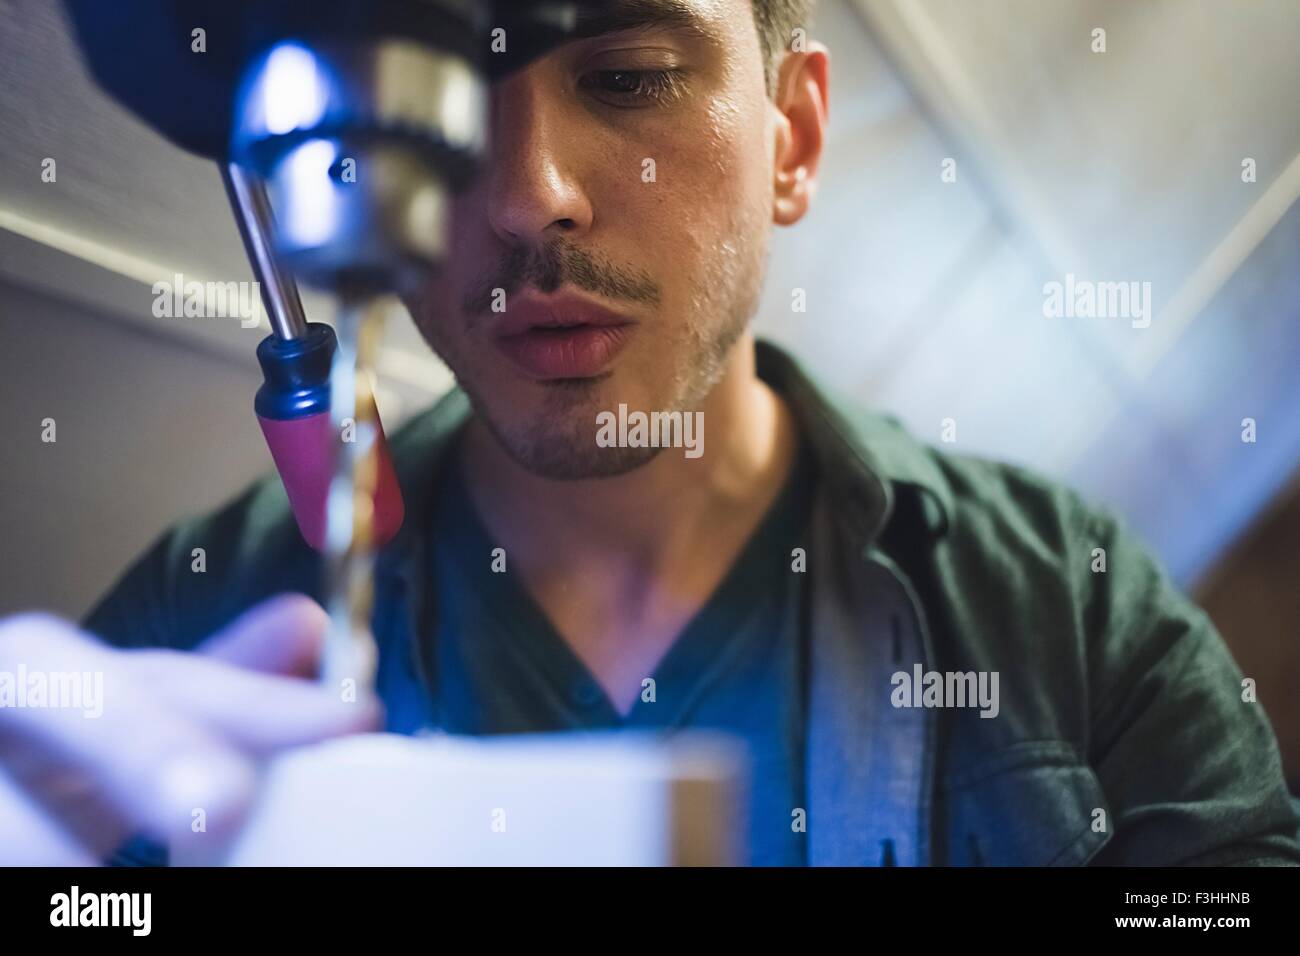 Low angle view of young man using tool, face partially obscured Stock Photo